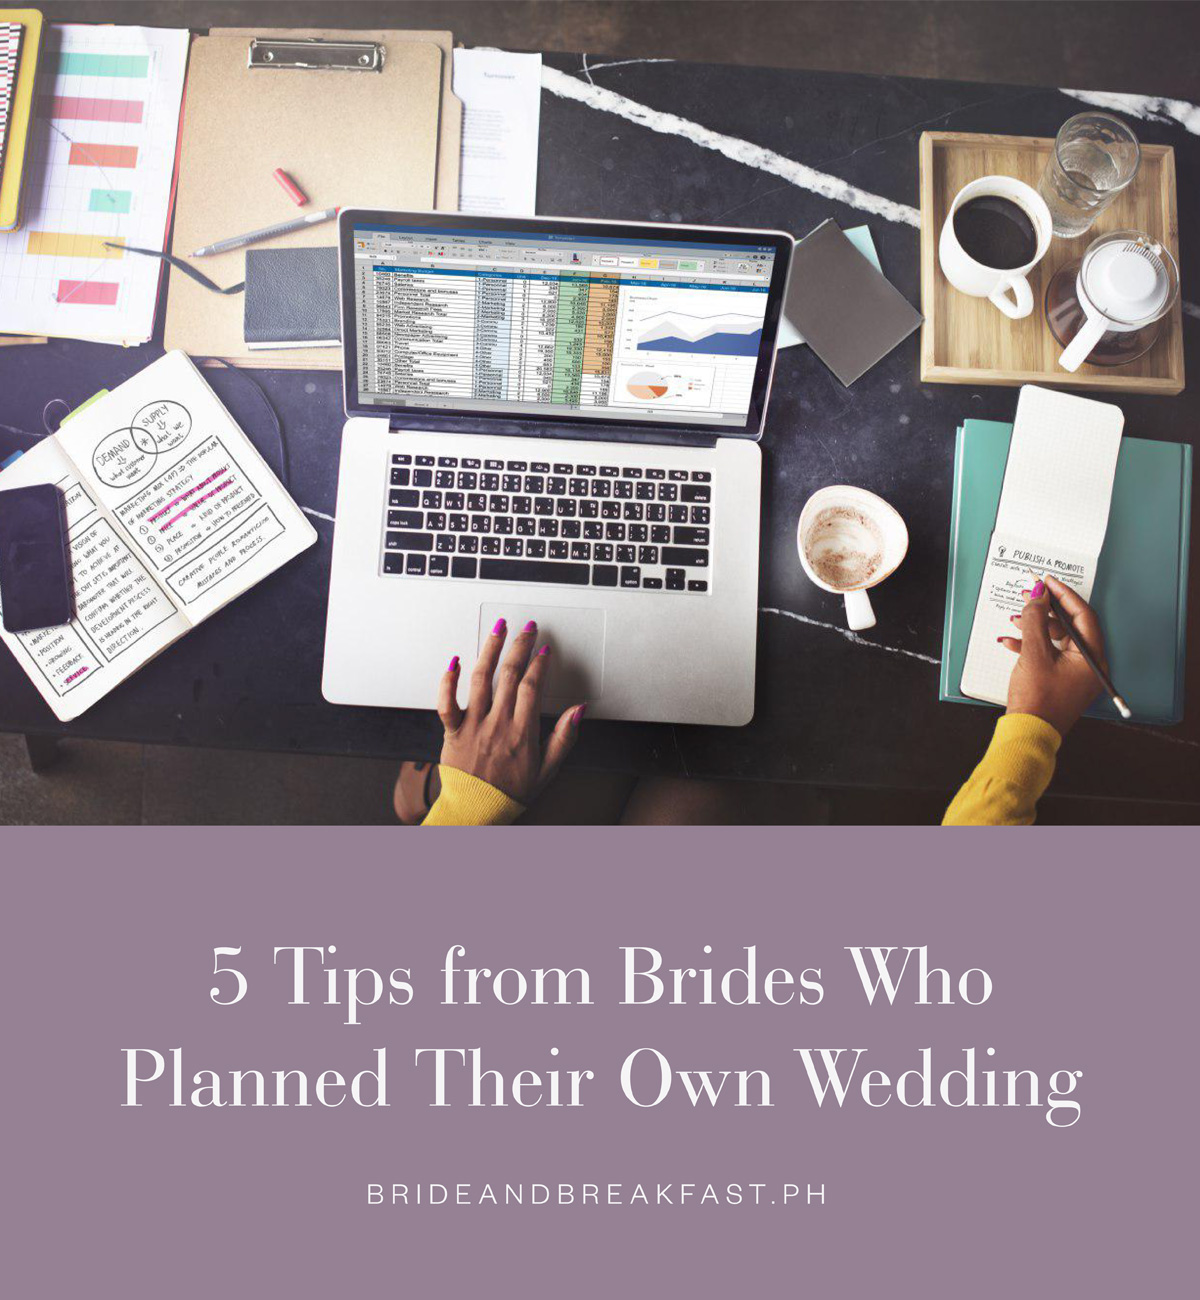 5 Tips from Brides Who Planned Their Own Wedding